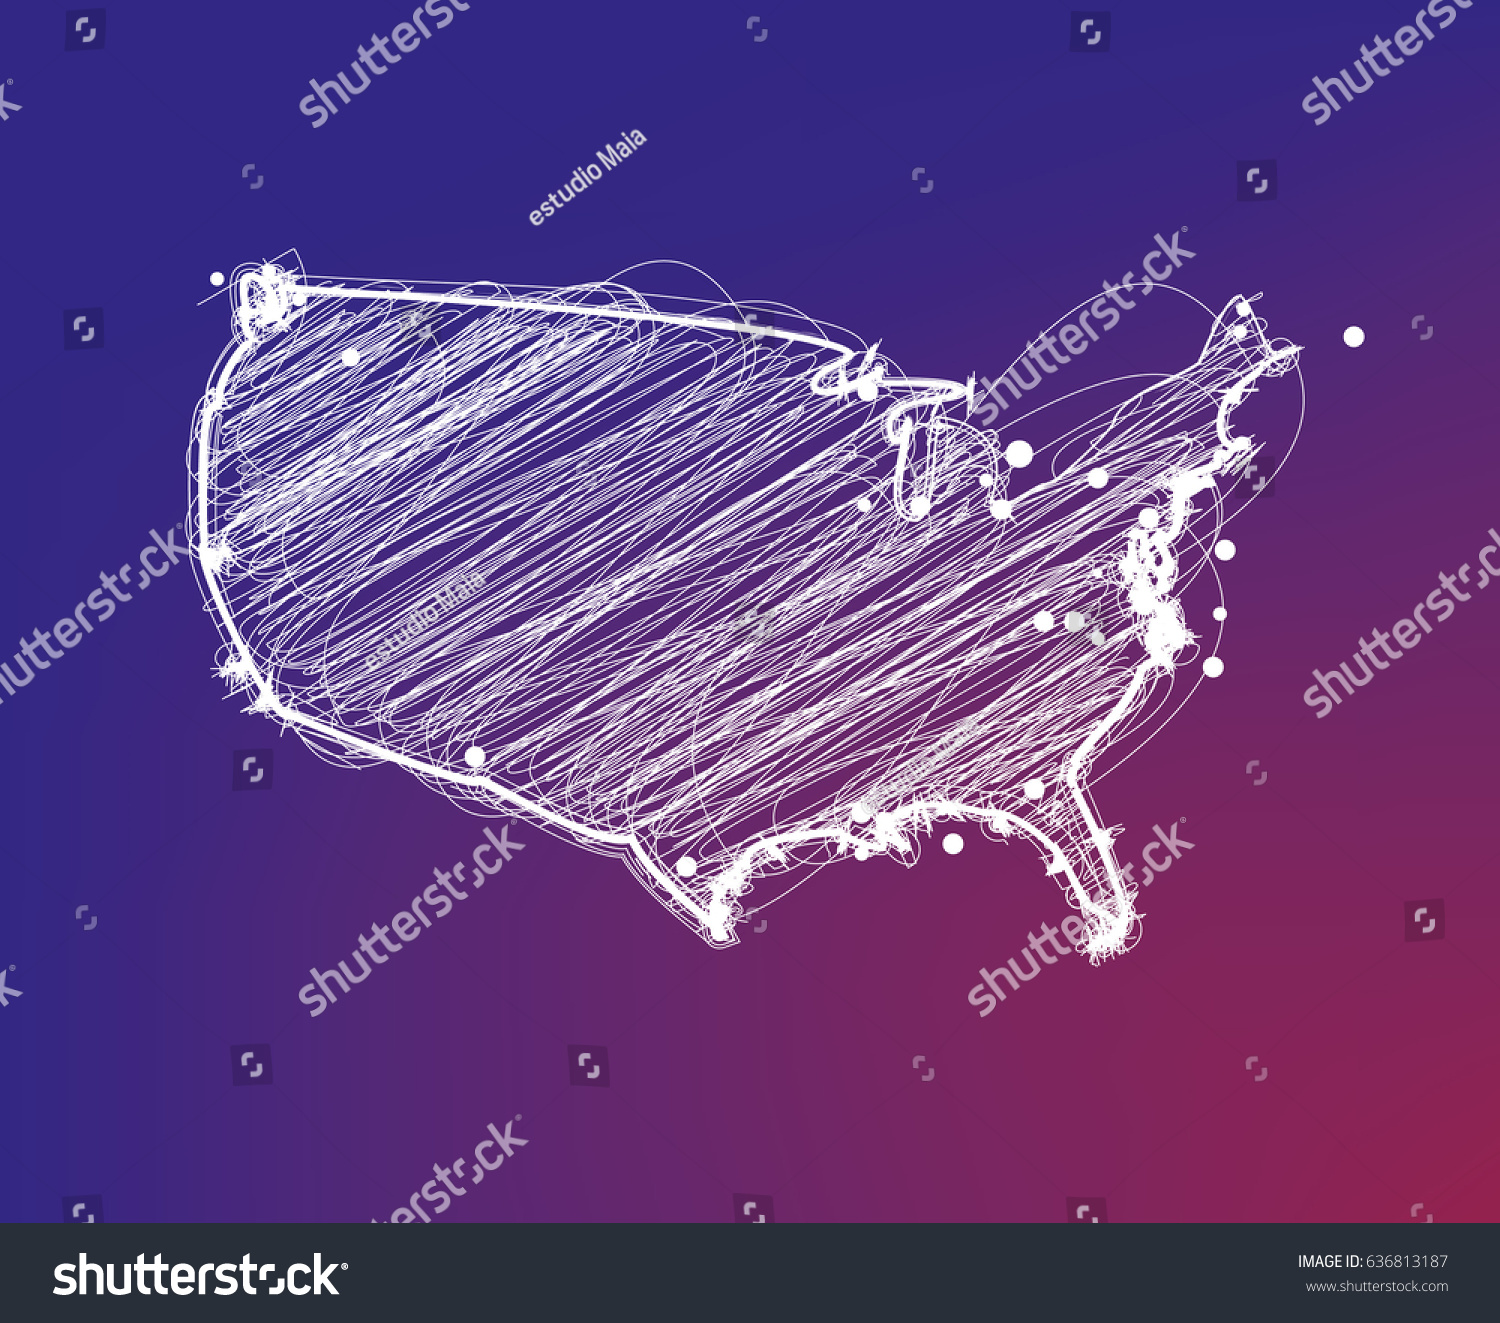 106-united-states-os-america-images-stock-photos-vectors-shutterstock